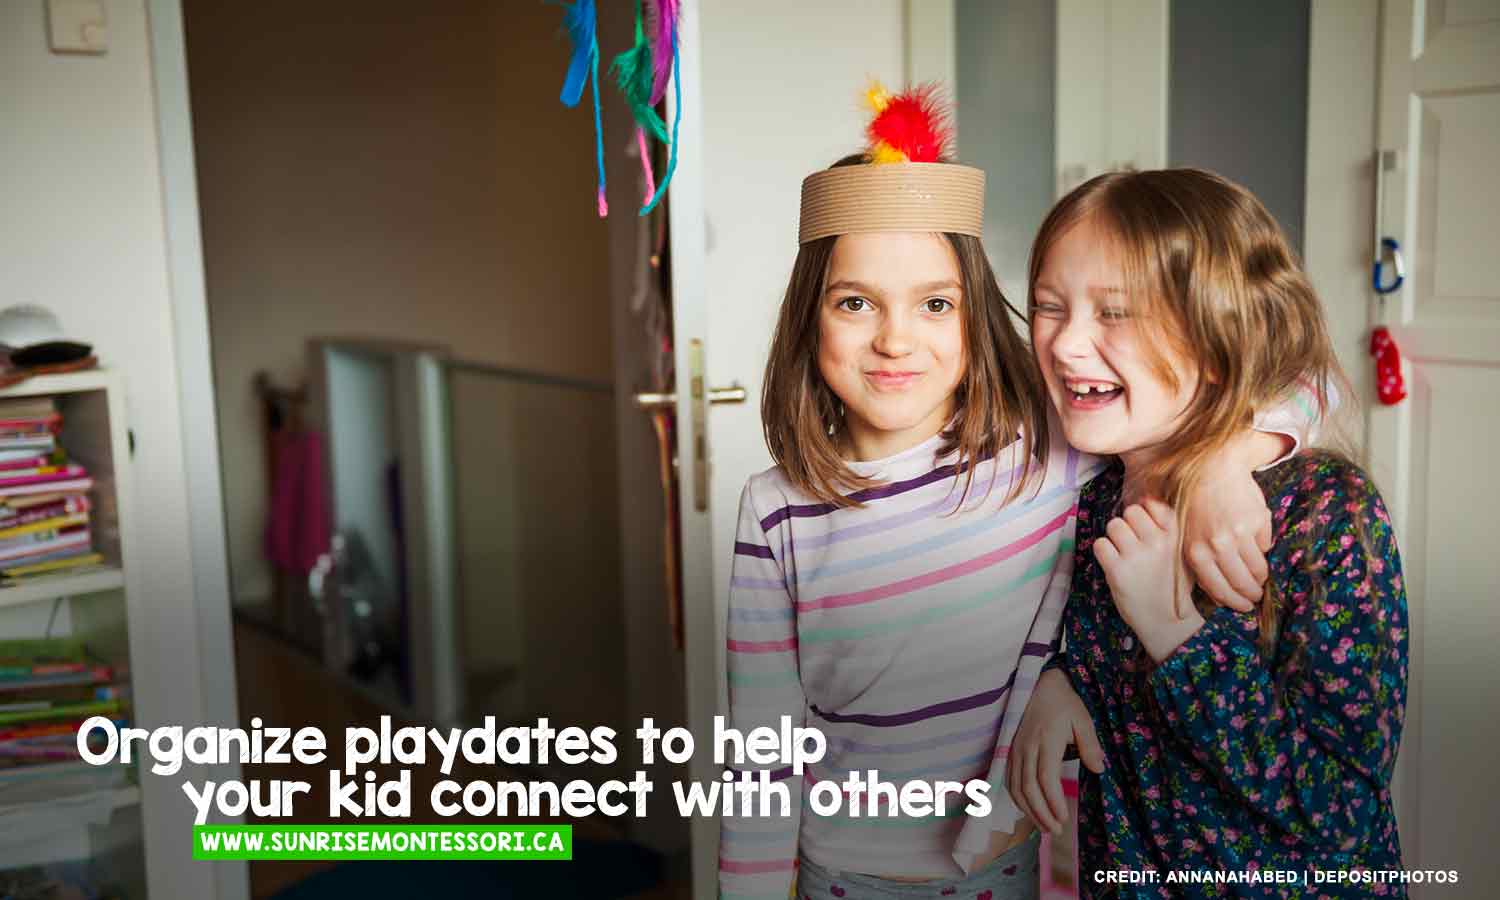 Organize playdates to help your kid connect with others